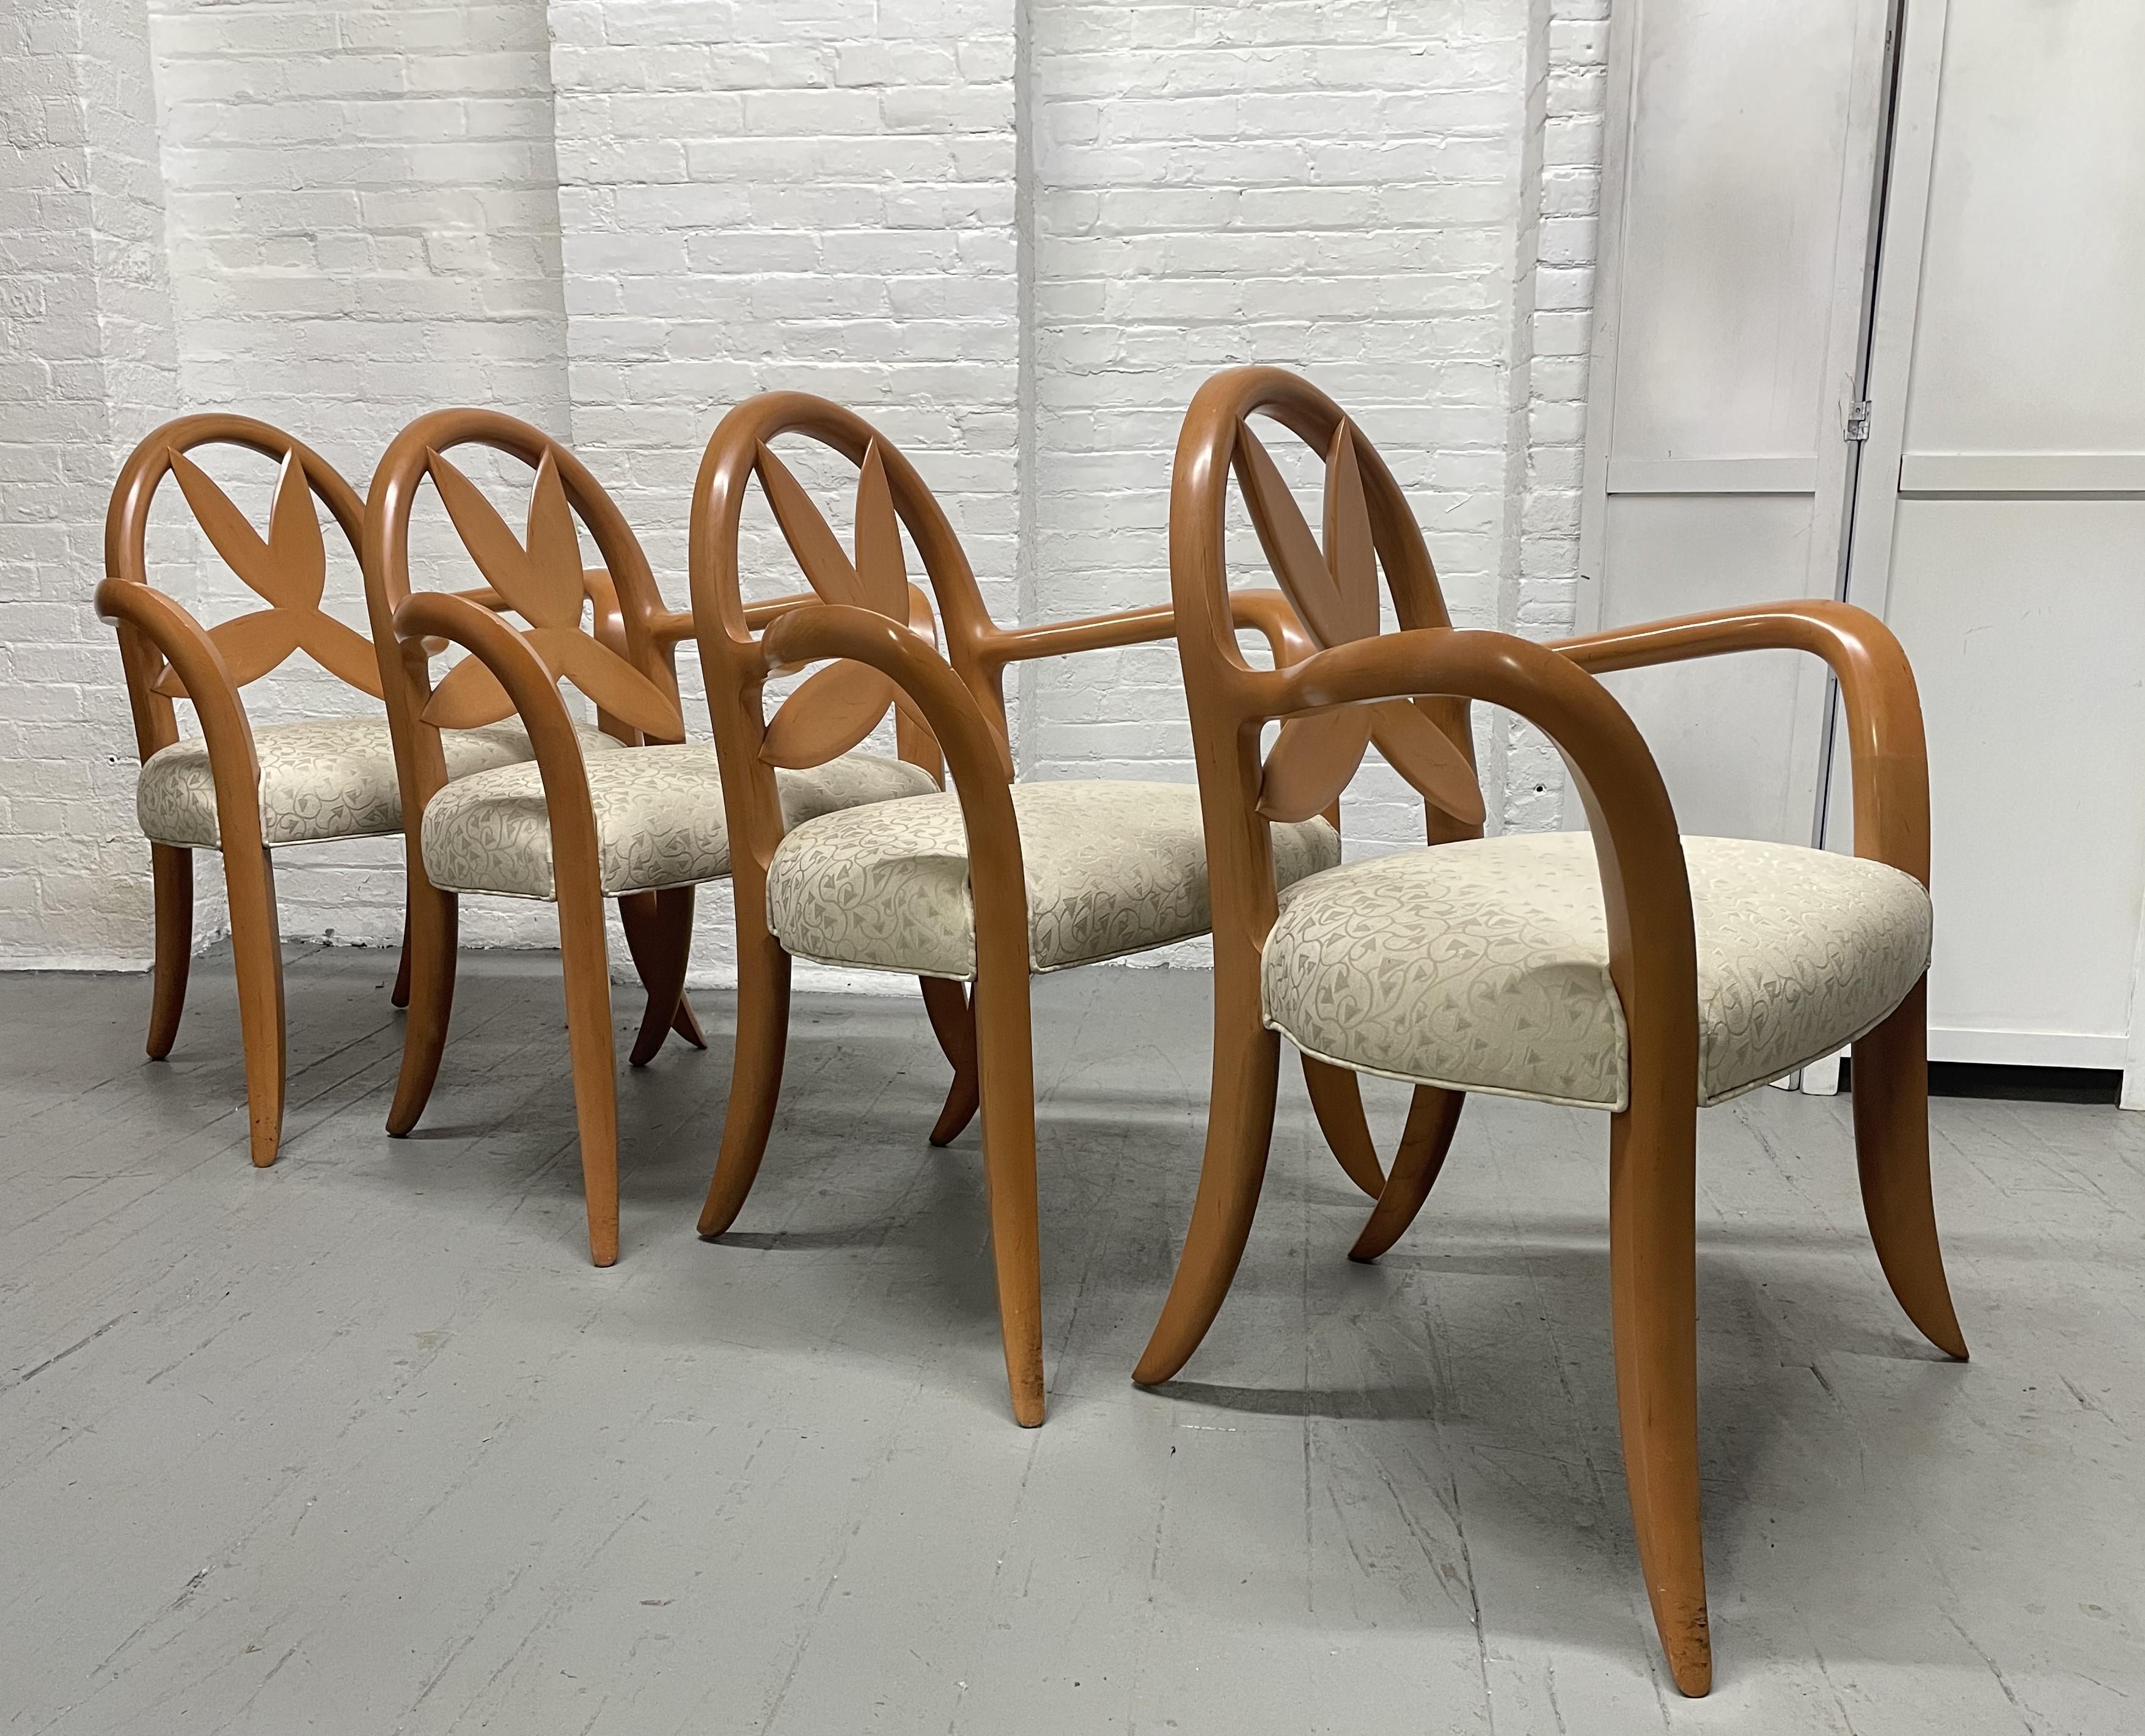 Poplar Wendell Castle Springborn Chairs, Set of 4 For Sale